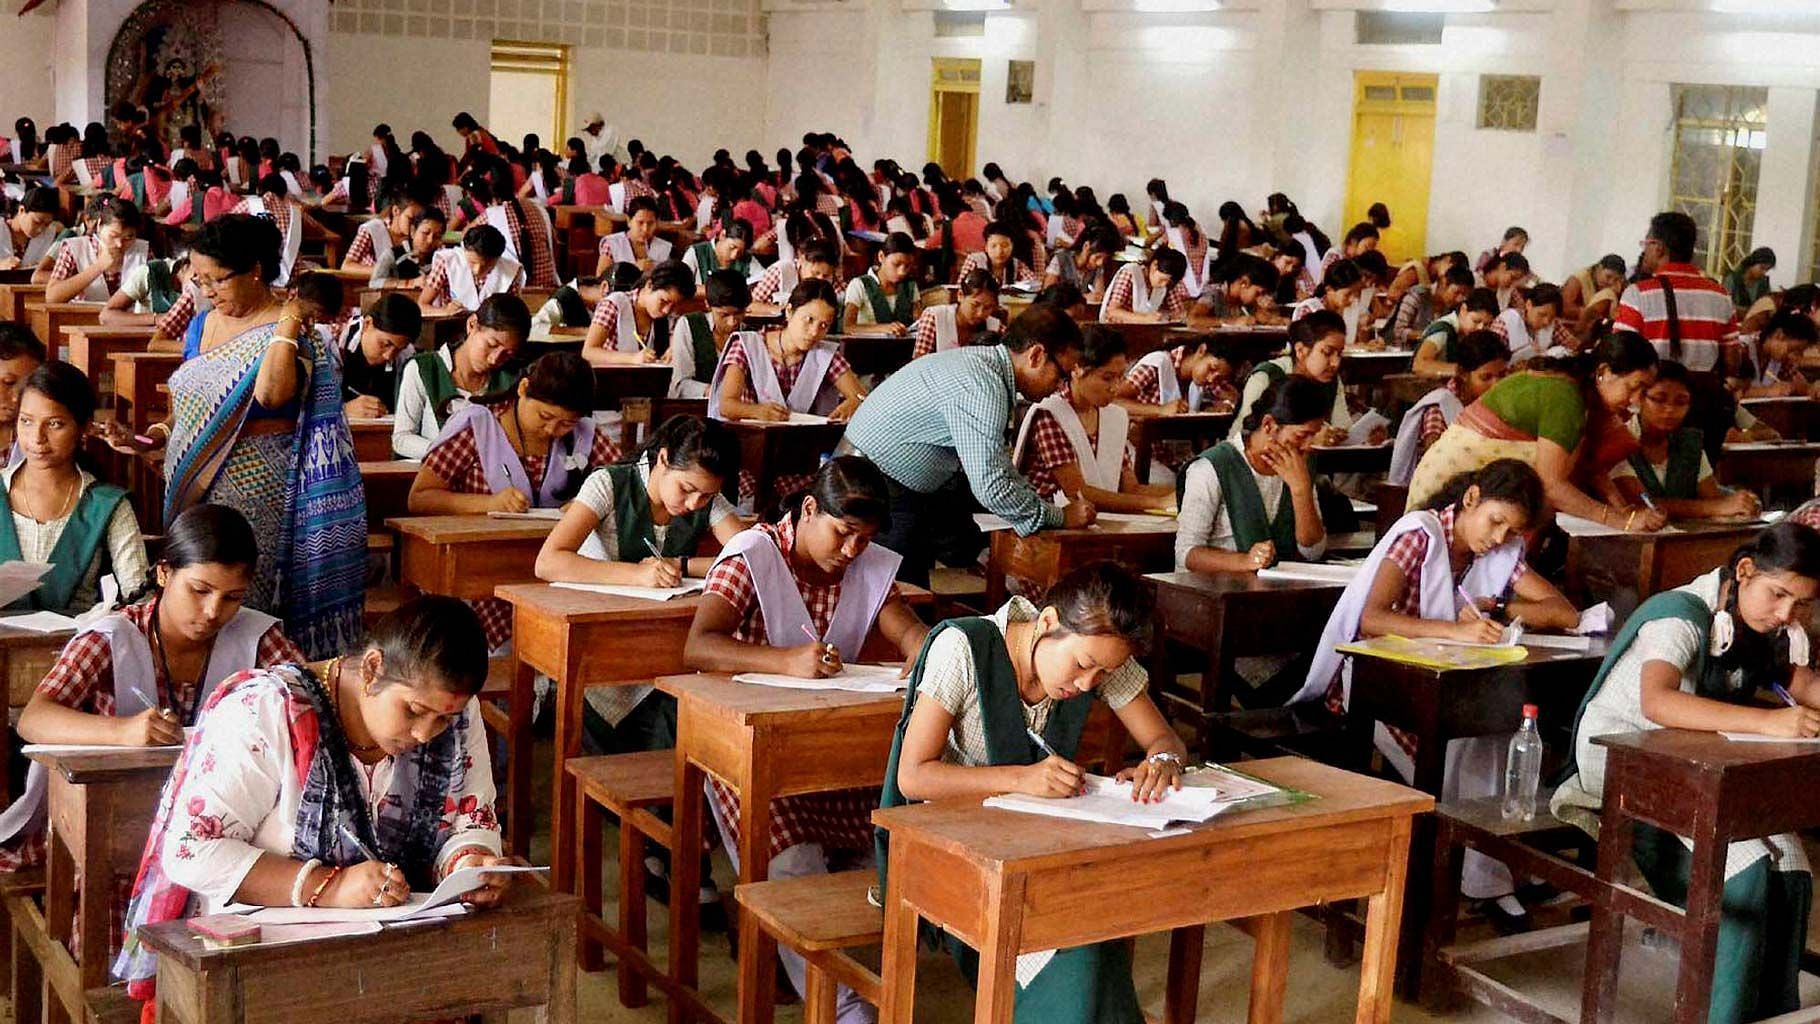 Maharashtra Education Board Compartment Exams 2020: MSBSHSE has released the dates for the Class 10 and Class 12 students.